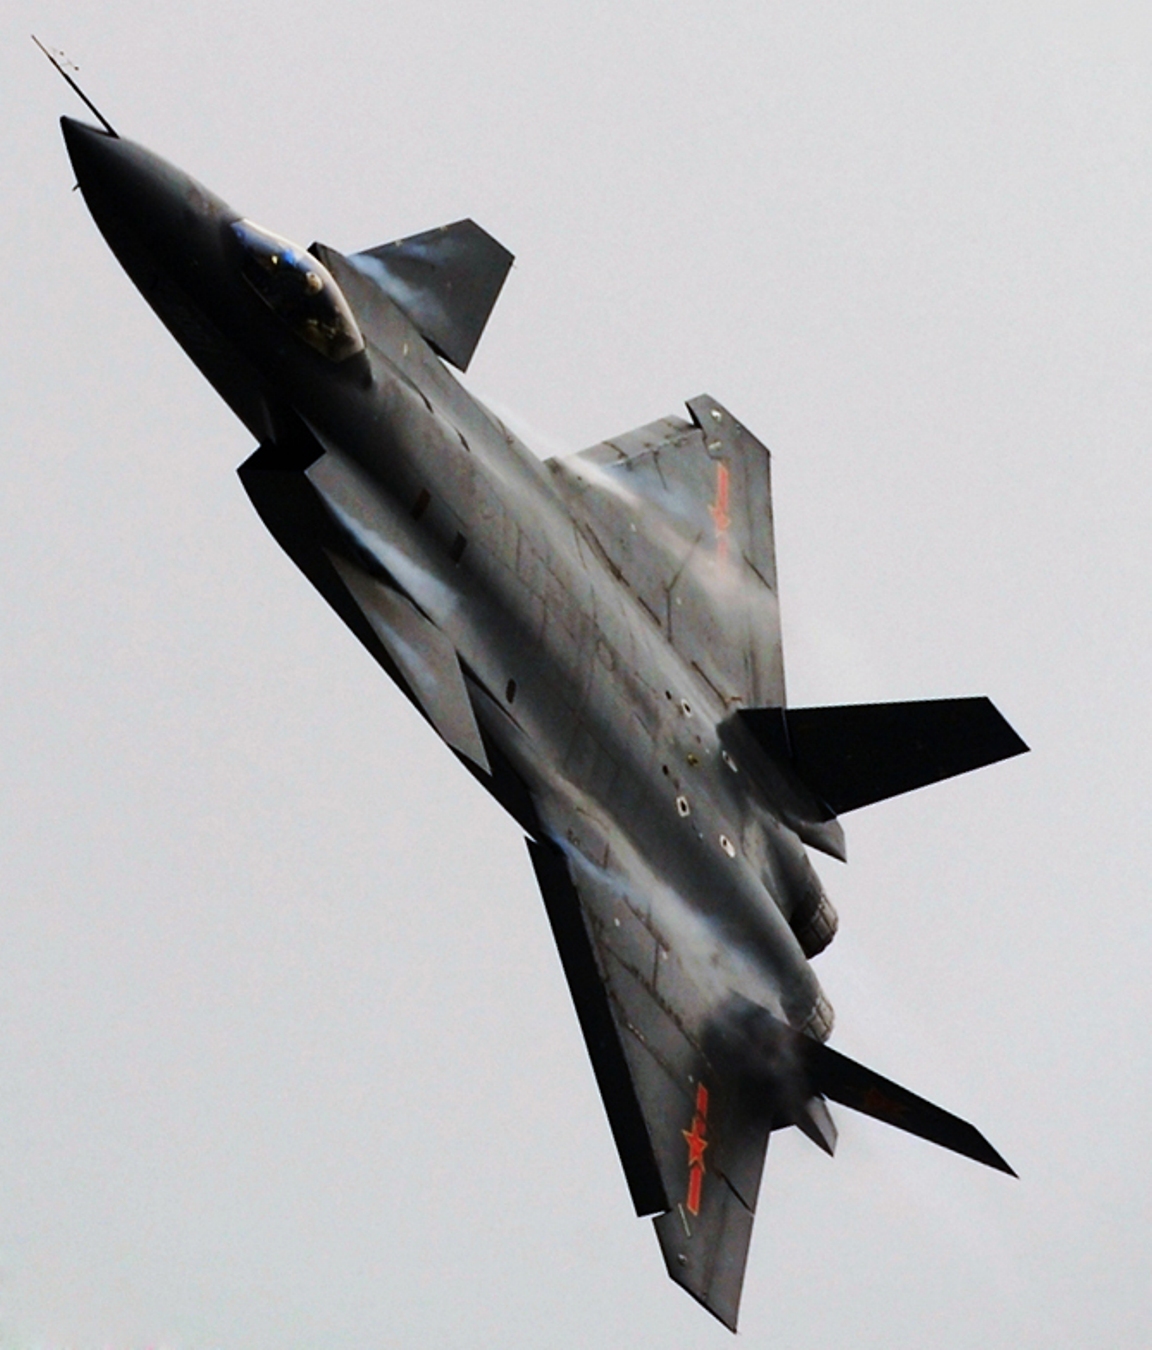 J-20+Mighty+Dragon++Chengdu+J-20+fifth+generation+stealth,+twin-engine+fighter+aircraft+prototype+People%27s+Liberation+Army+Air+Force++OPERATIONAL+weapons+aam+bvr+missile+ls+pgm+gps+plaaf+test+flight+2012+%281%29.jpg